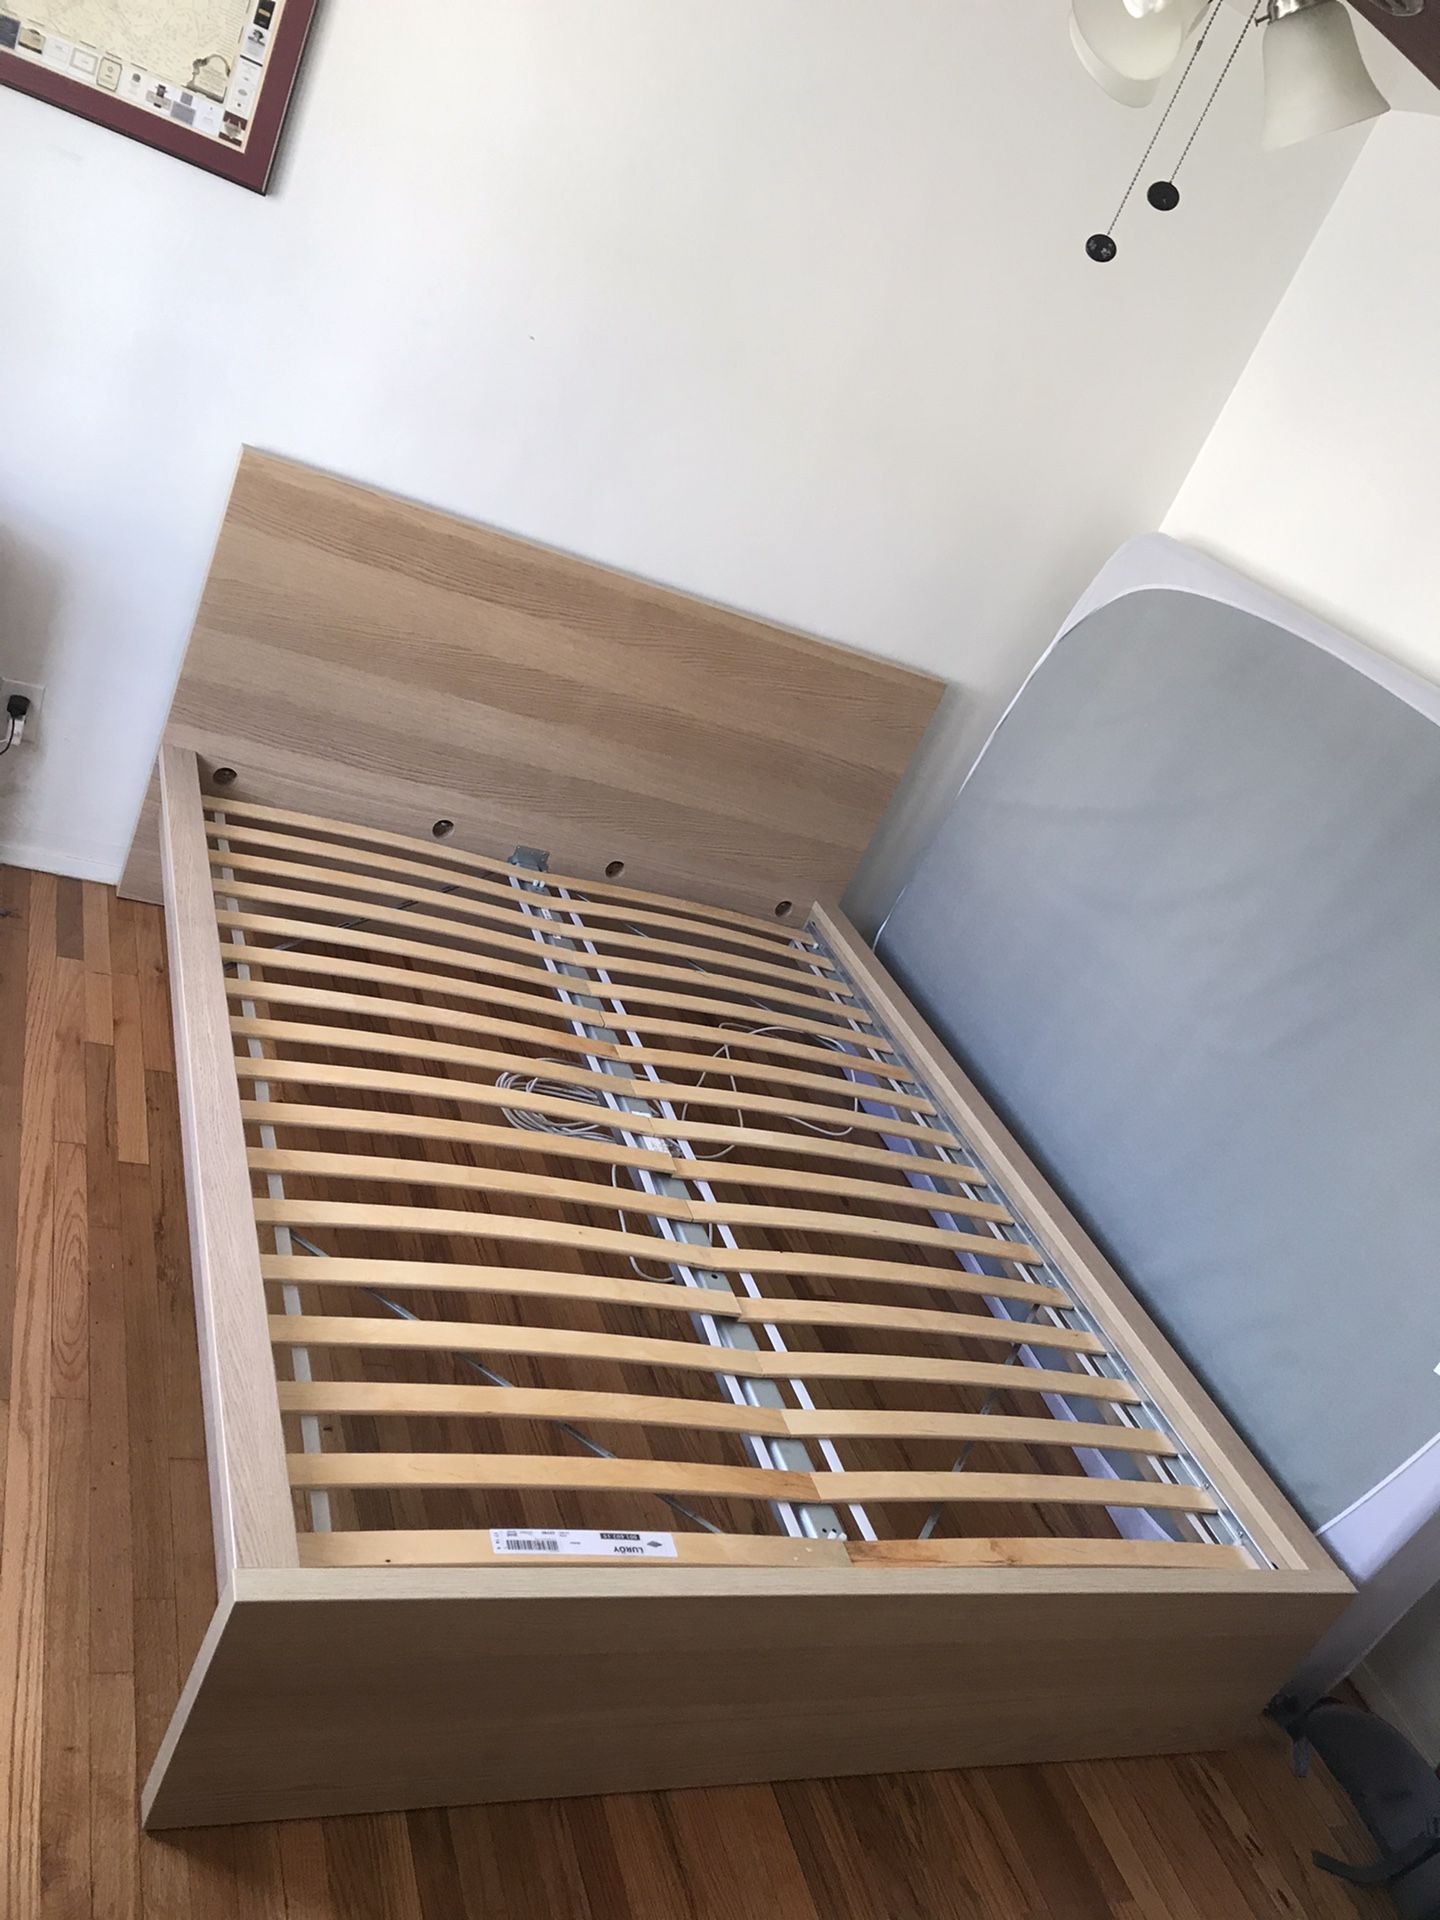 IKEA Queen-Sized Bed Frame